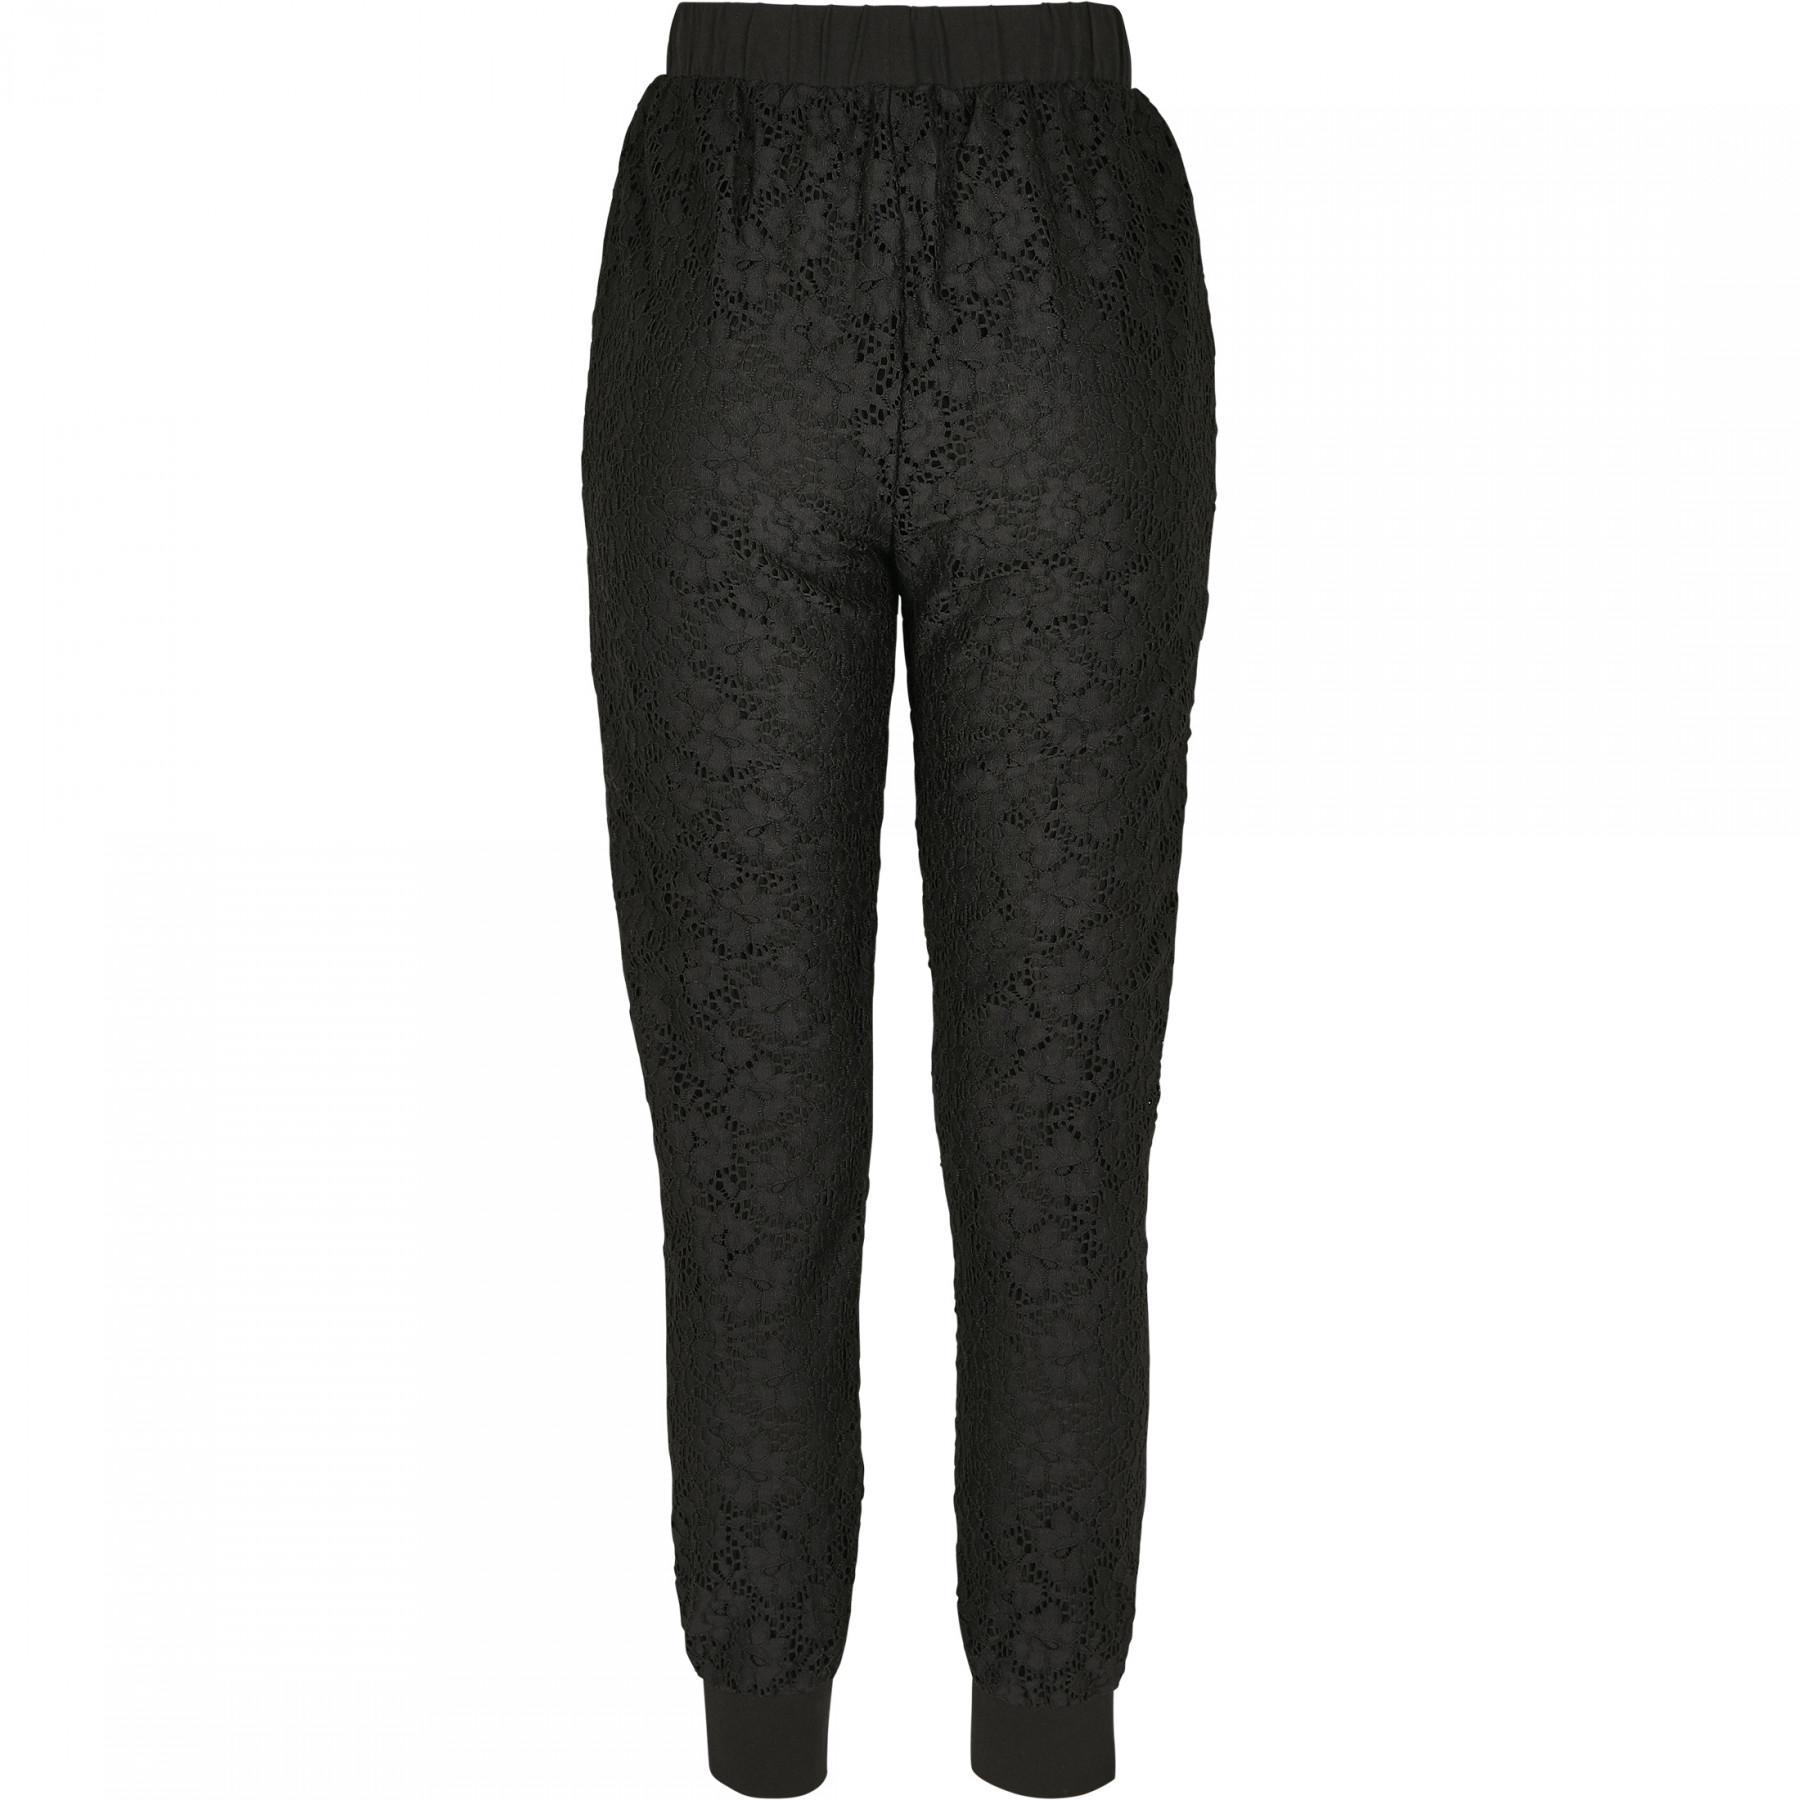 Trousers woman Urban Classic terry towelling GT